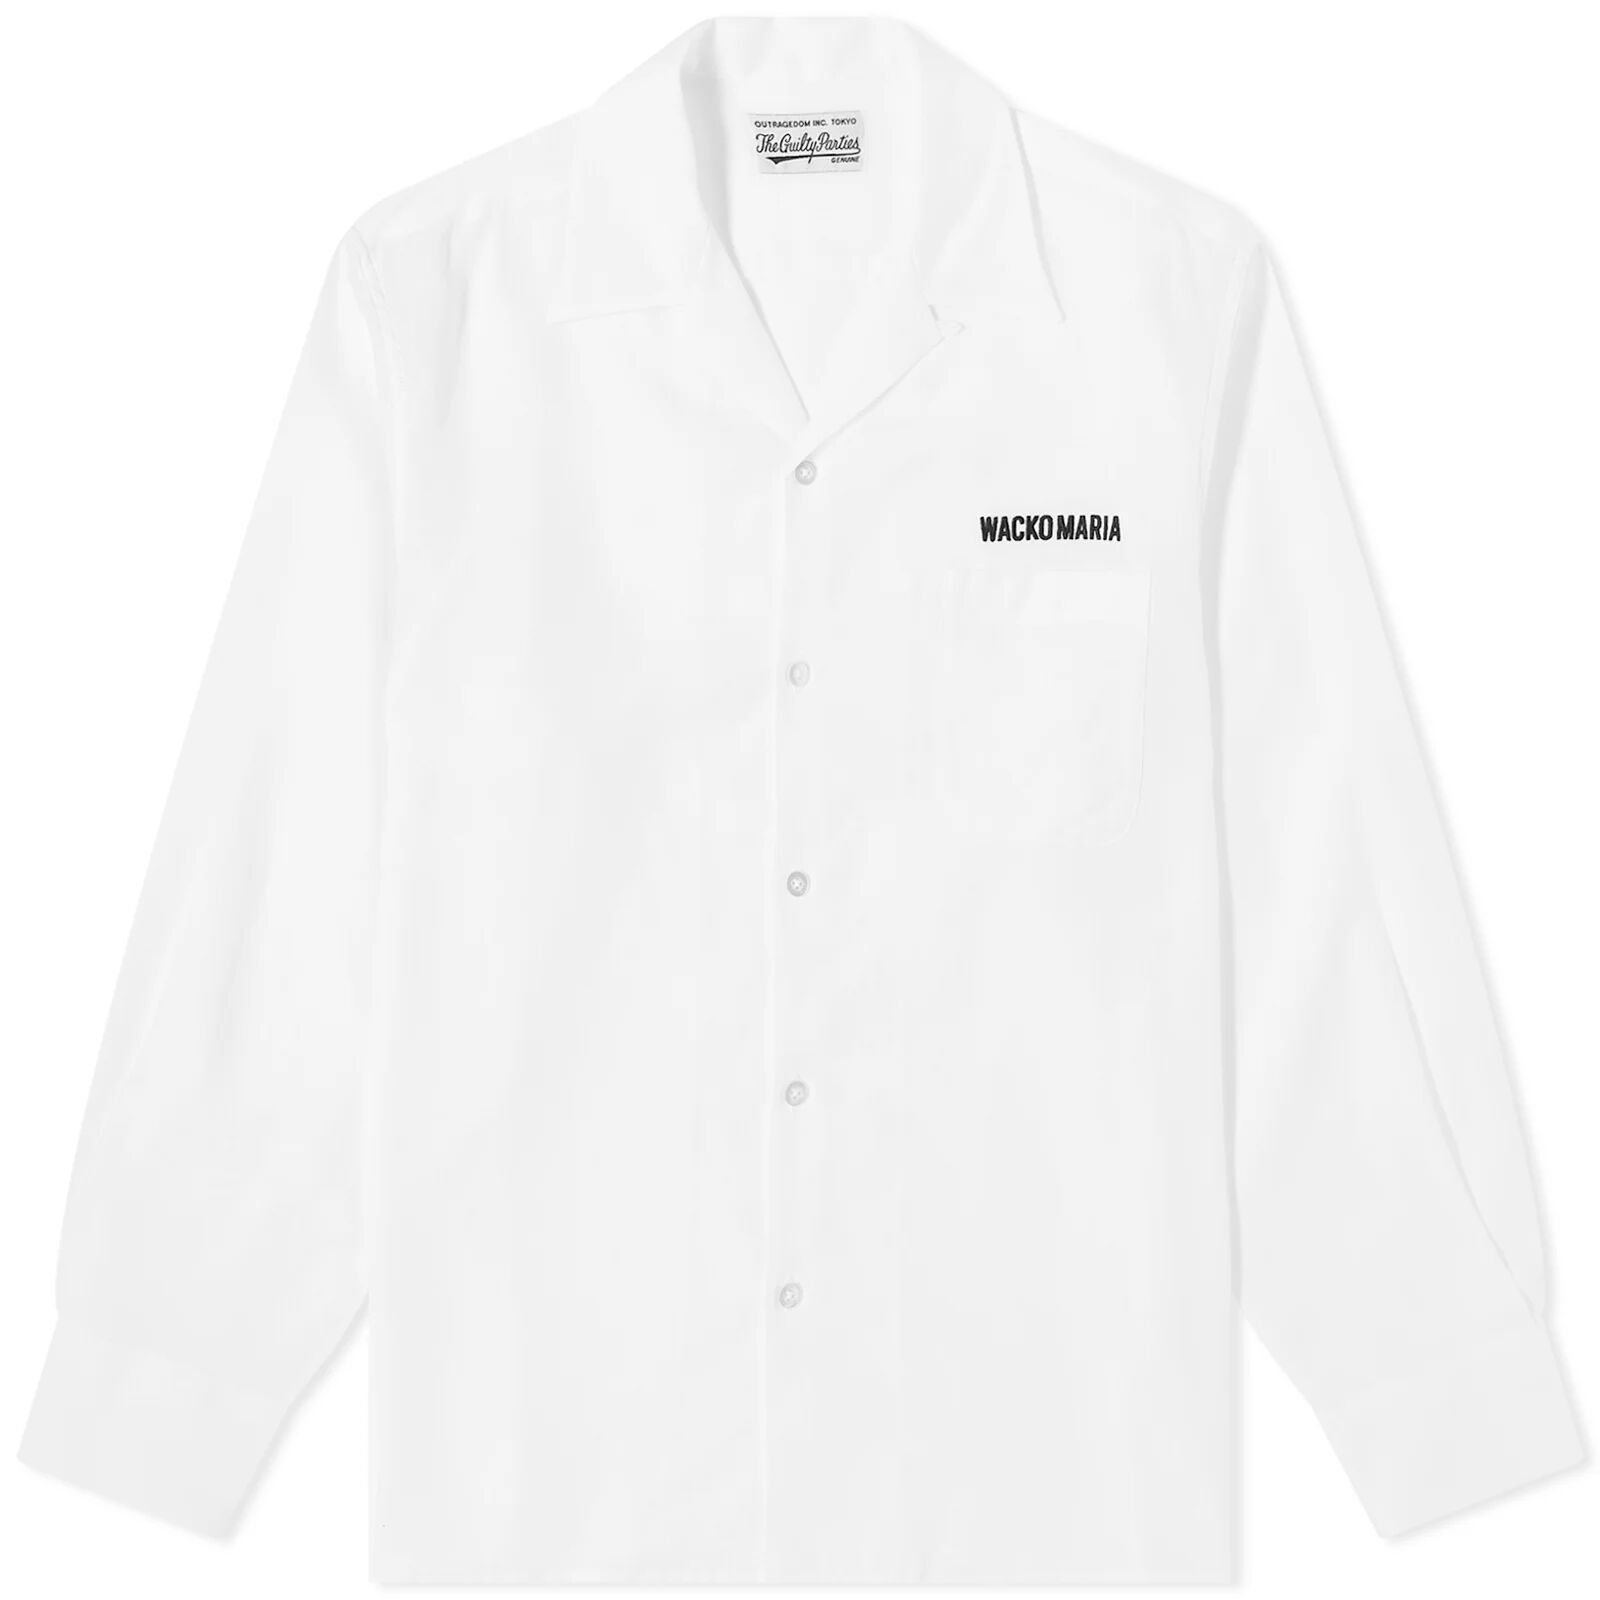 Wacko Maria Men's 50's Embroidered Logo Shirt in White, Size X-Large